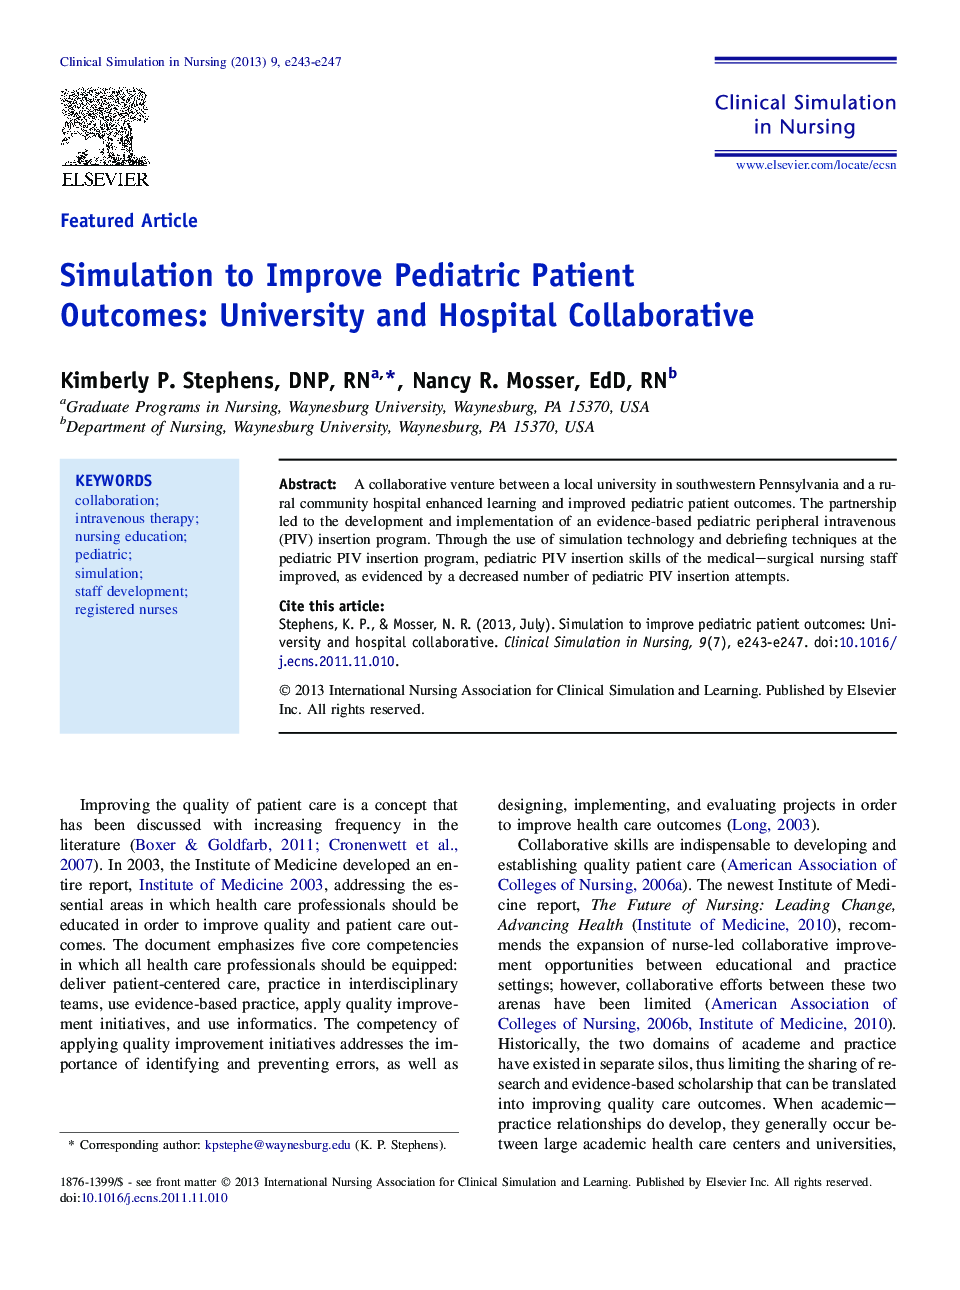 Simulation to Improve Pediatric Patient Outcomes: University and Hospital Collaborative